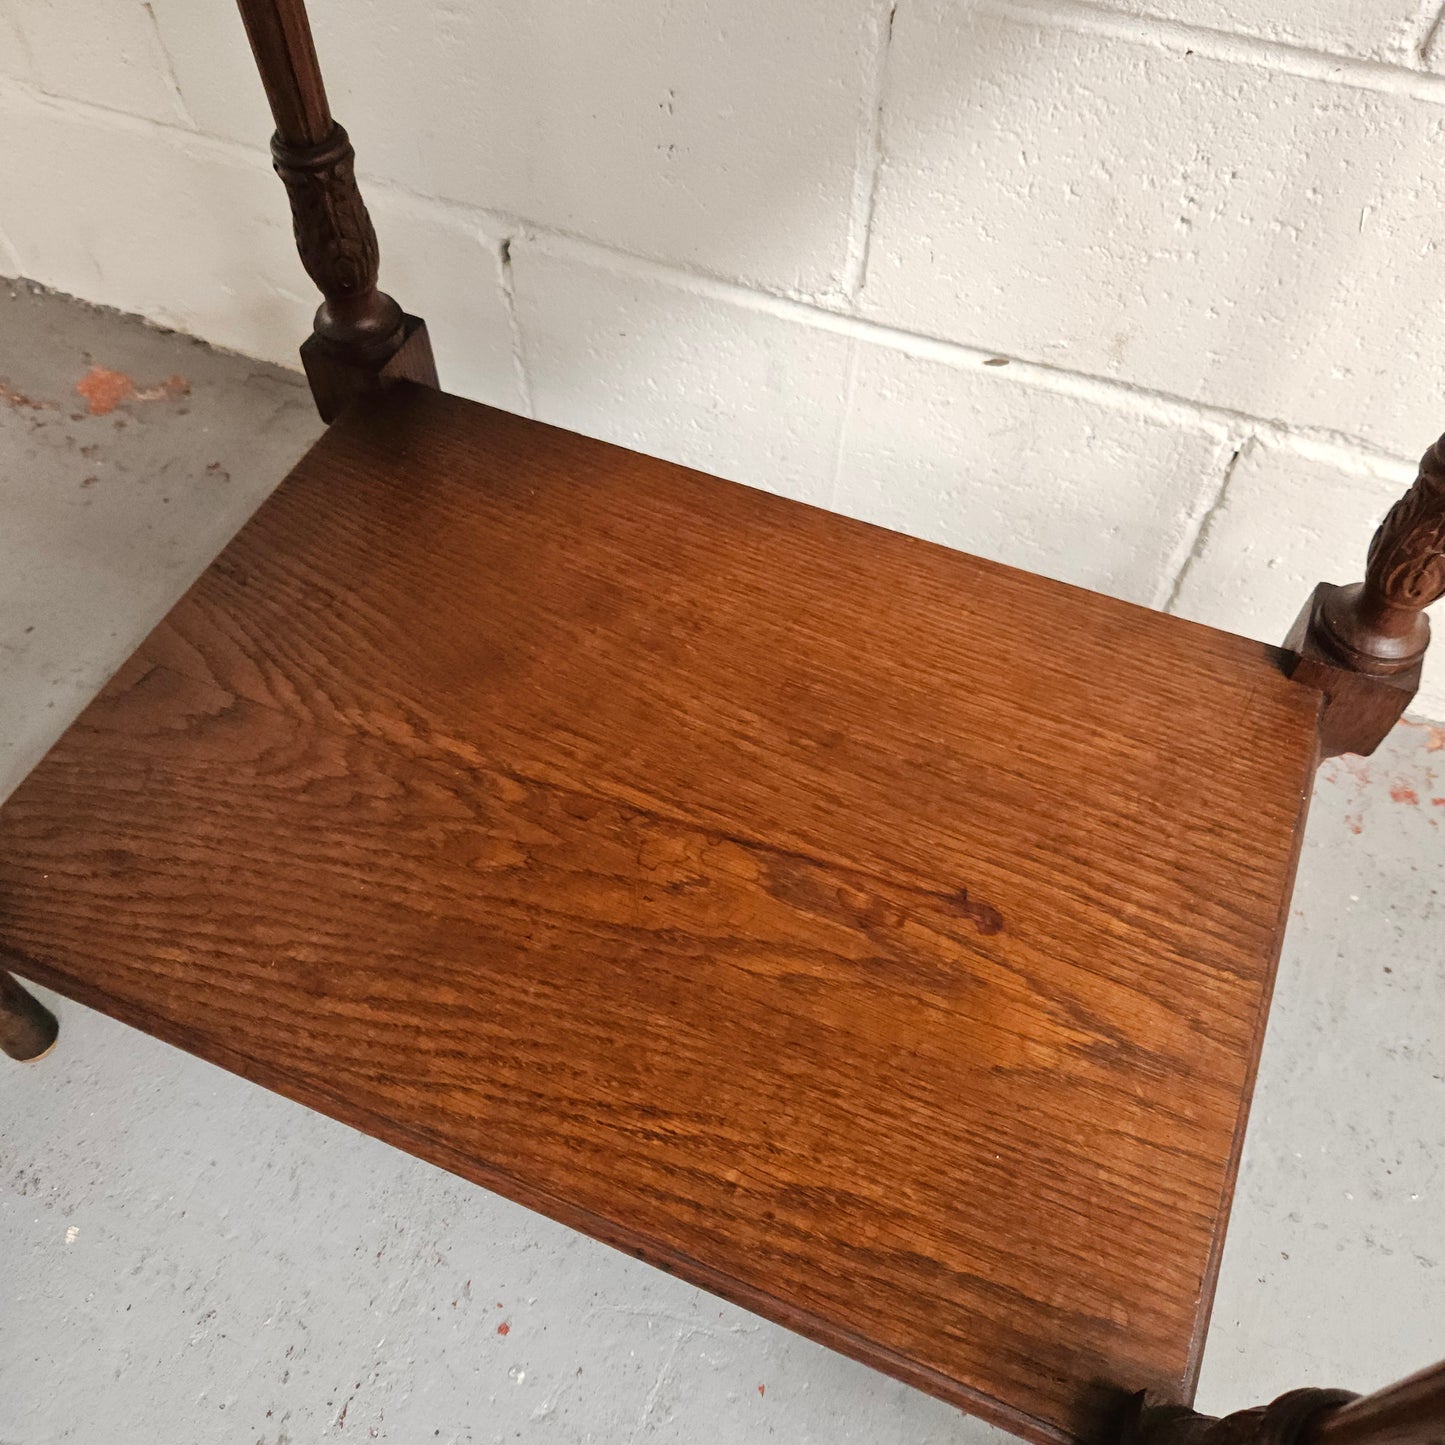 French Oak One Drawer Side Table